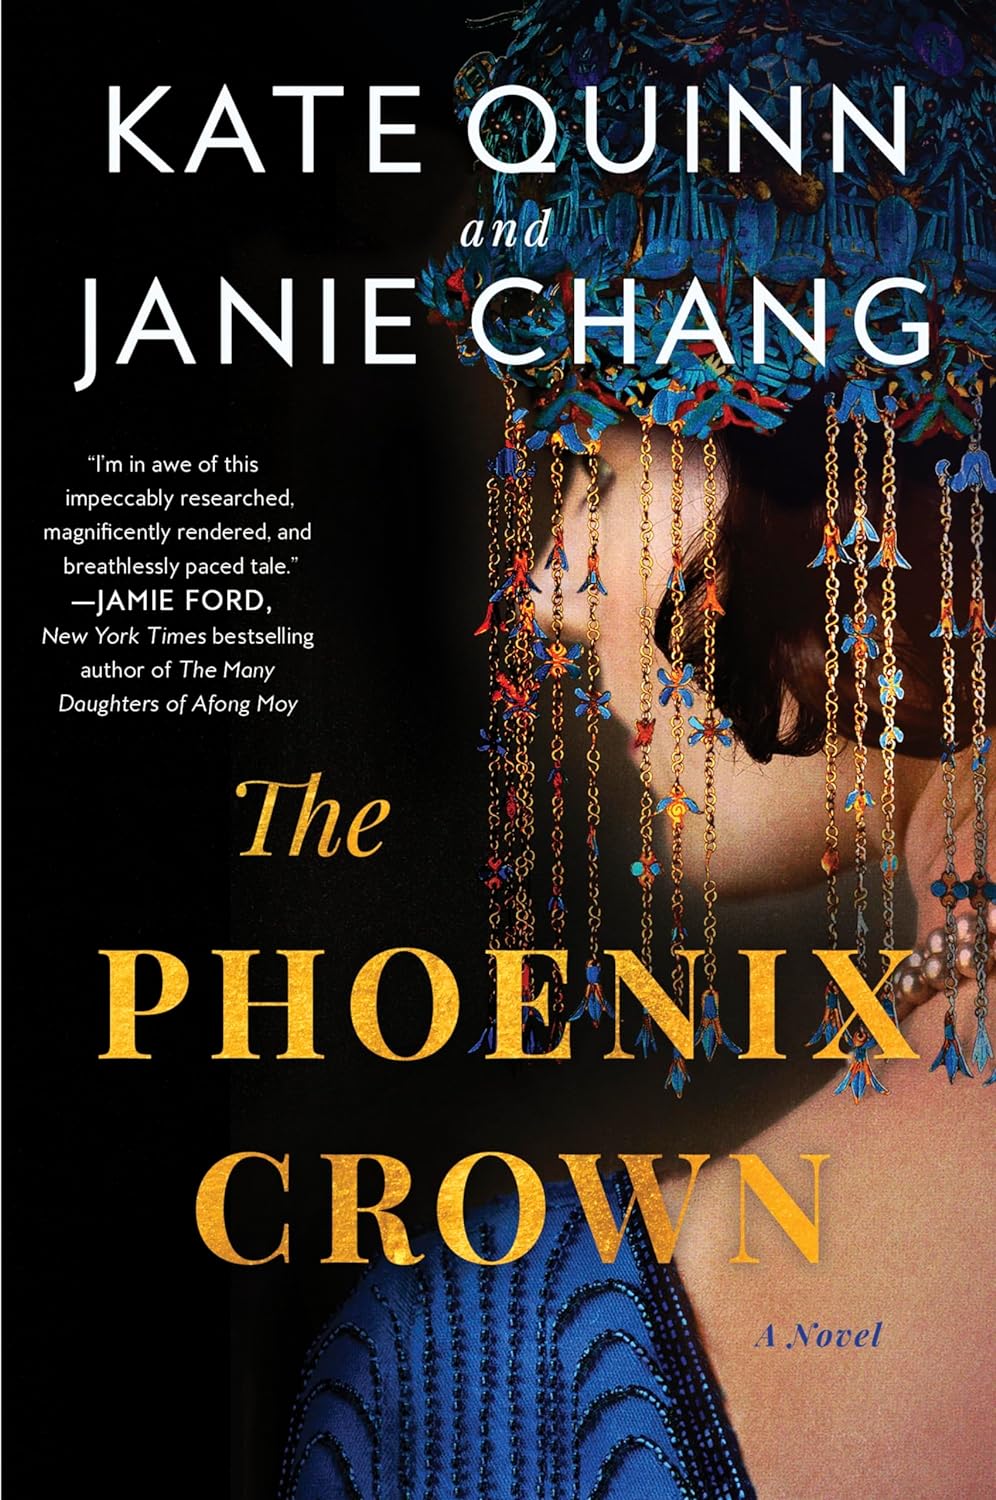 Image for "The Phoenix Crown"